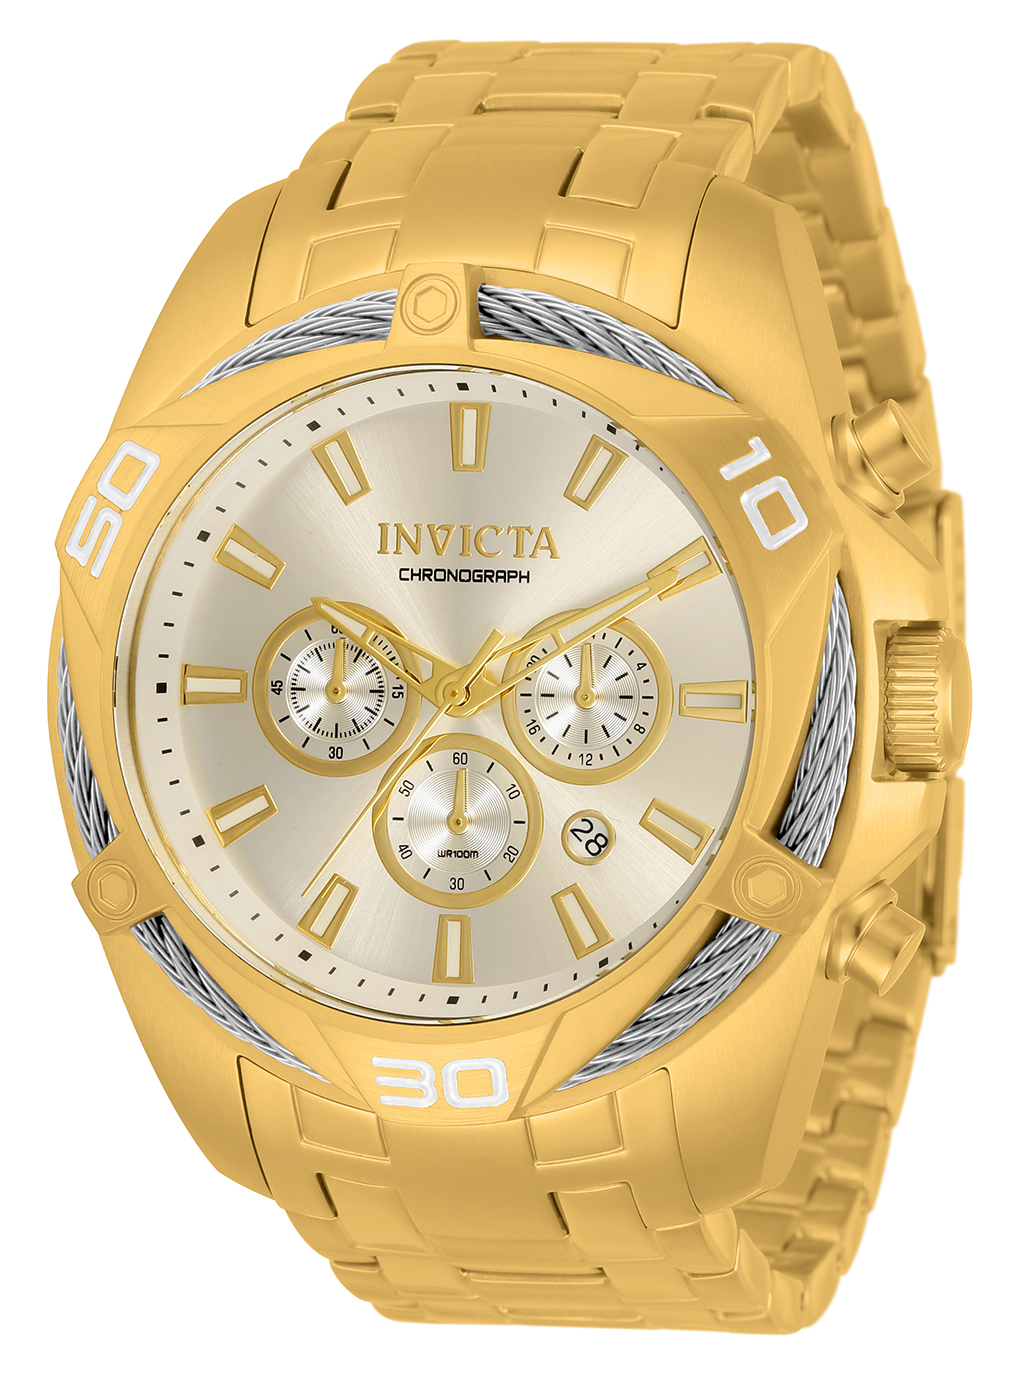 Invicta Bolt Quartz Mens Watch - 50mm Stainless Steel Case, Stainless Steel Band, Gold (34121)